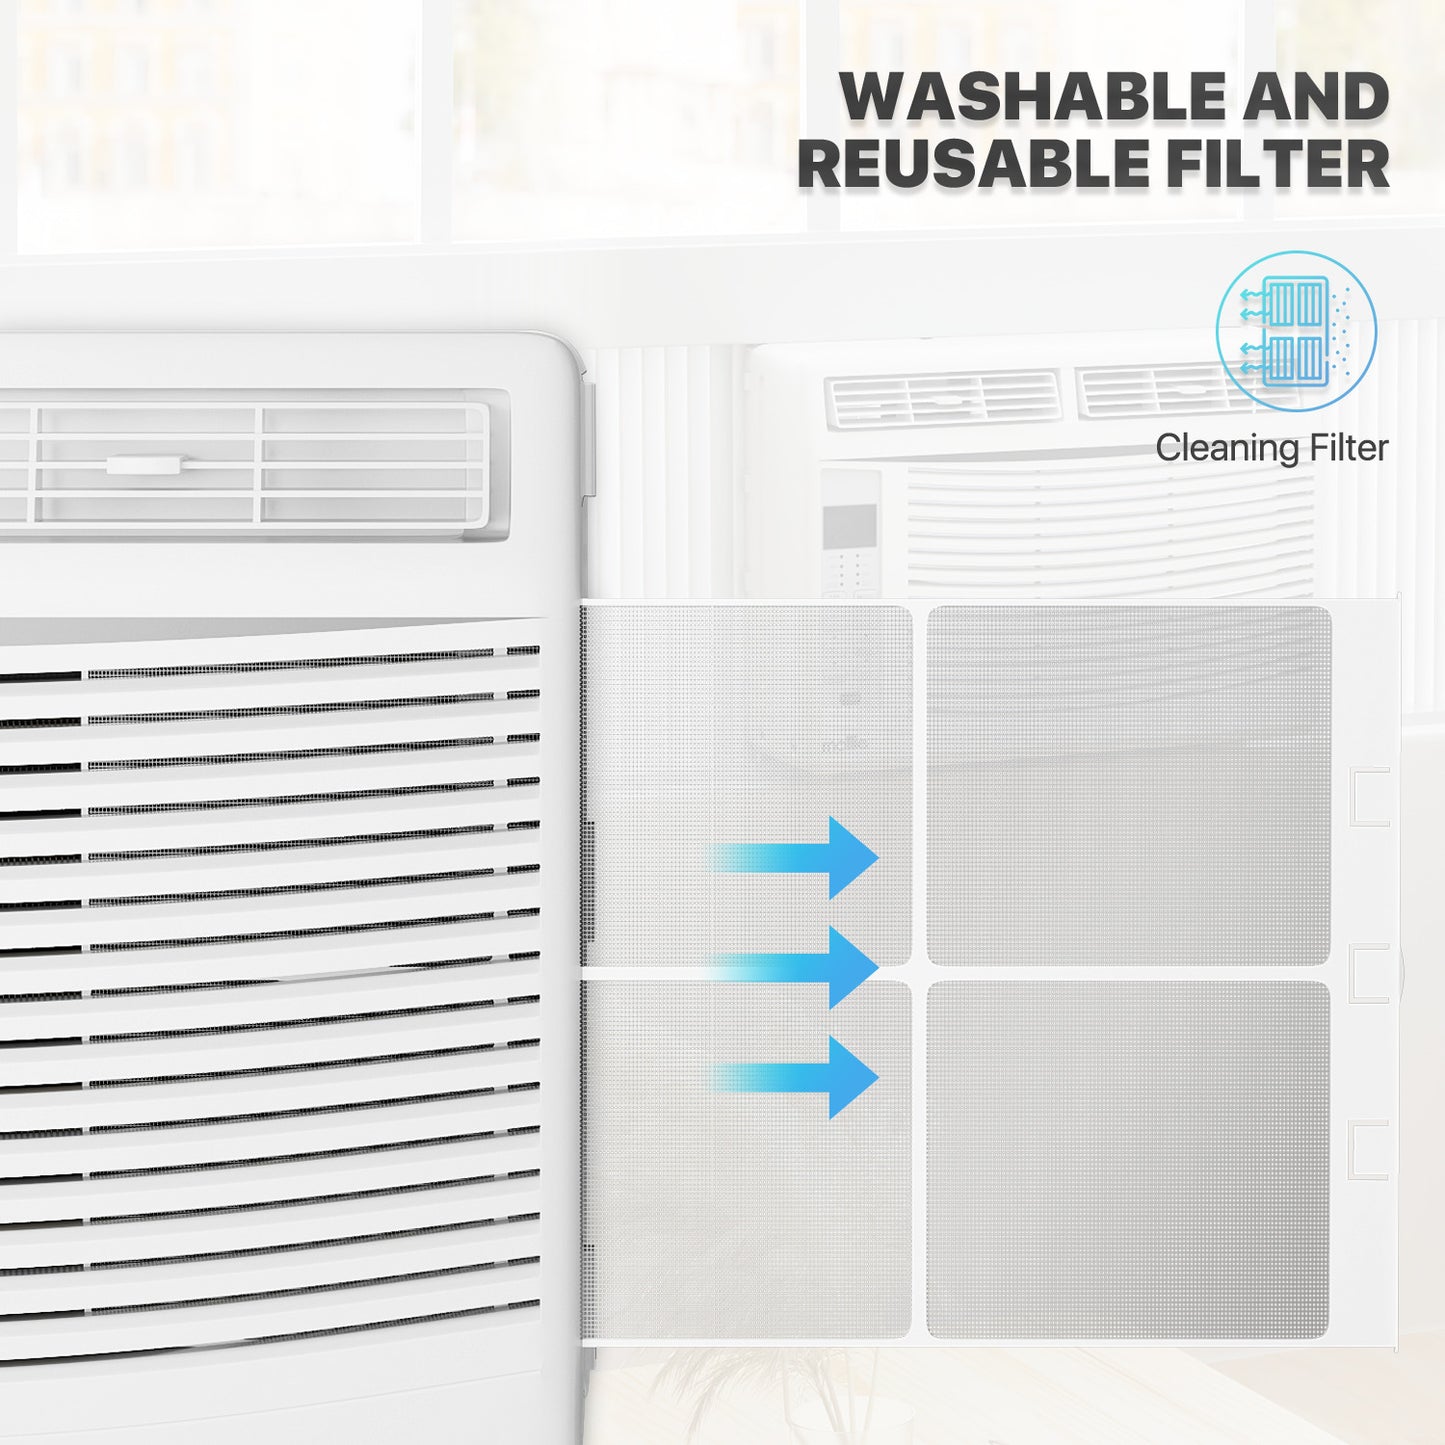 Electrical - Window Air Conditioner w/remote + Wifi App-6K